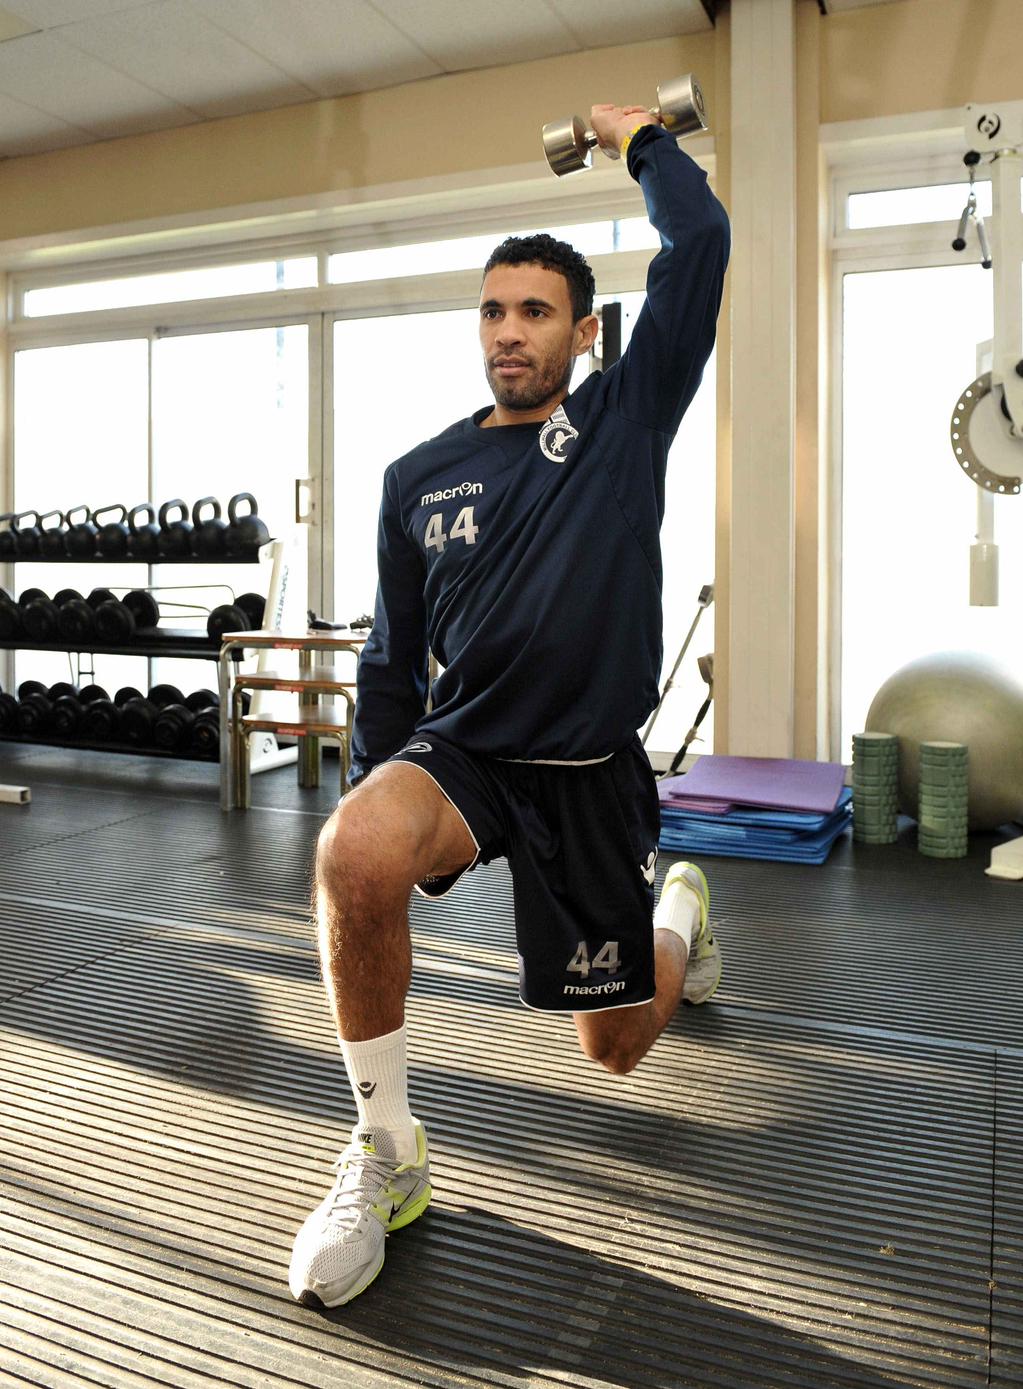 Carlos Edwards in the gym rehabilitating his knees